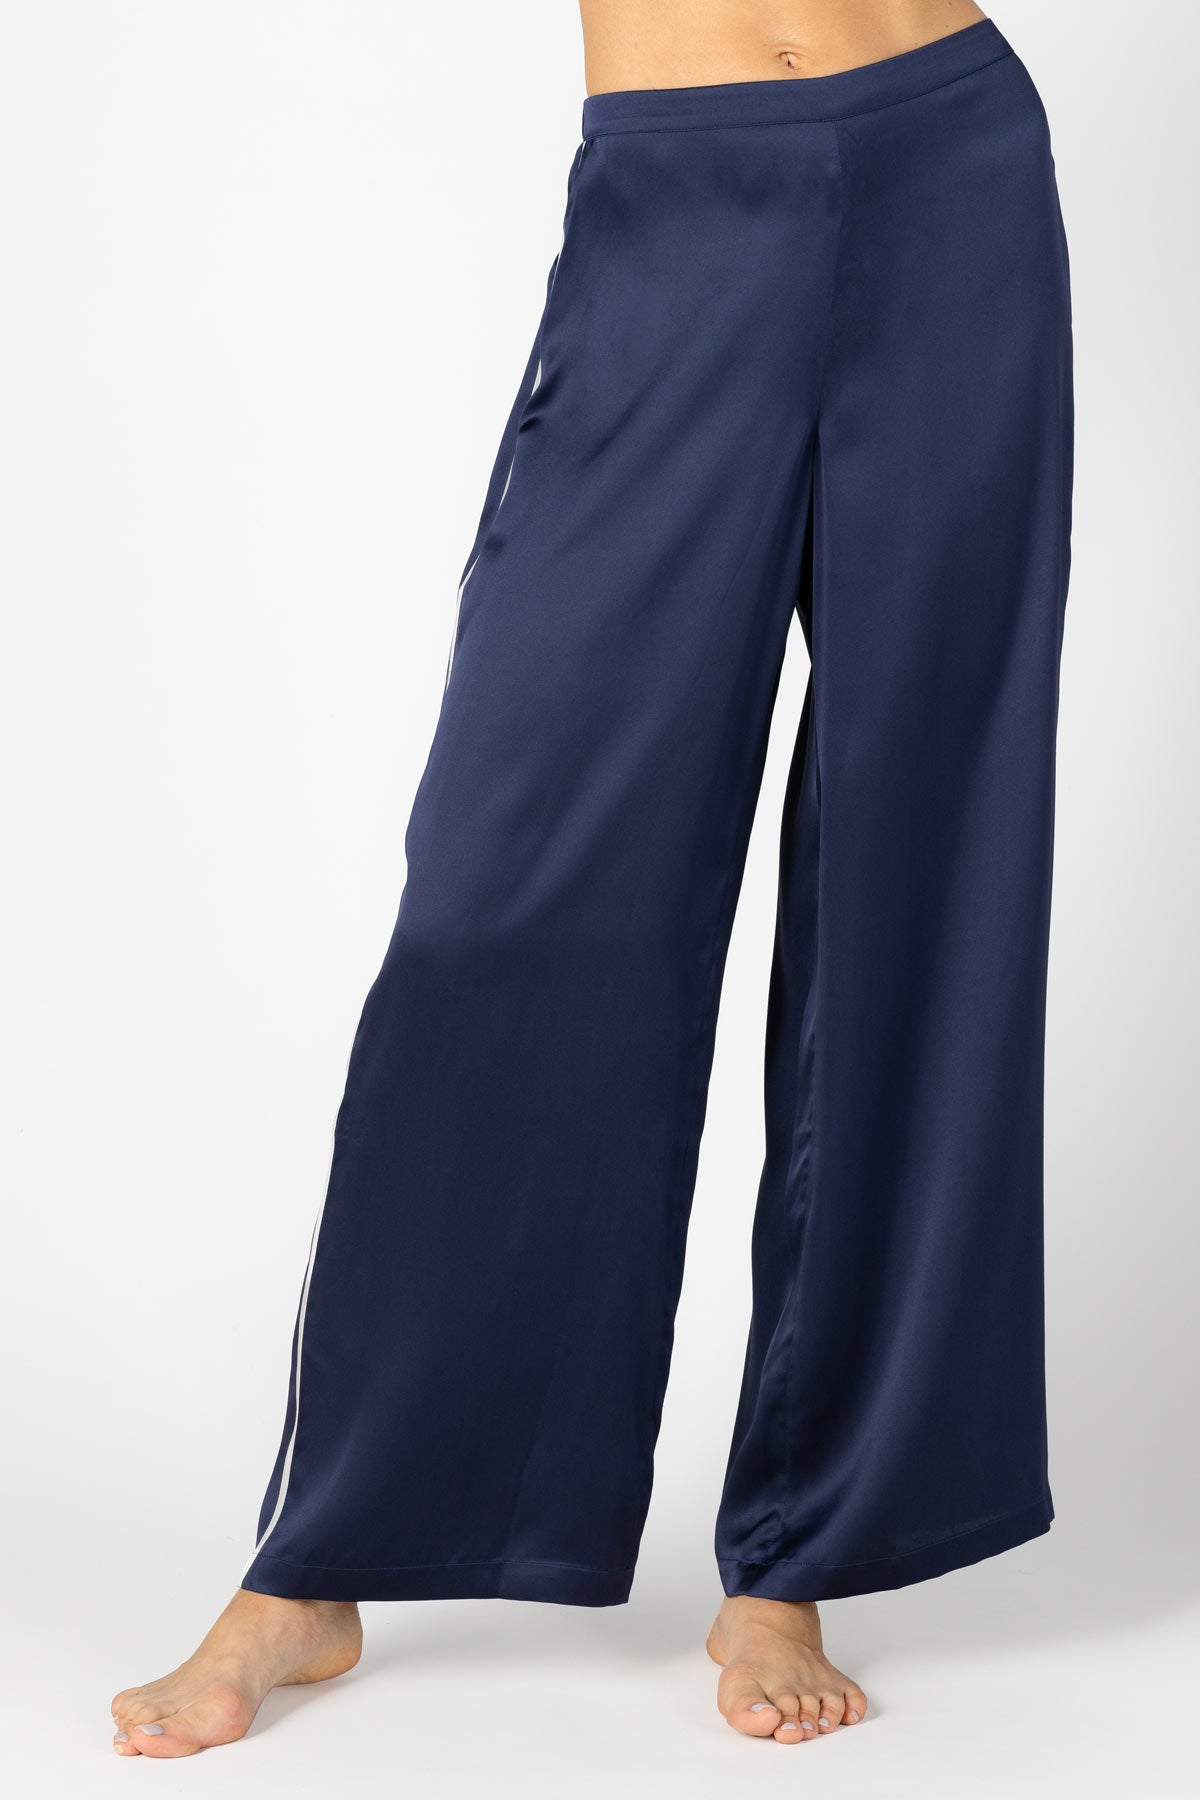 FLOREOS Regular Fit Women Gold, Grey Trousers - Buy FLOREOS Regular Fit  Women Gold, Grey Trousers Online at Best Prices in India | Flipkart.com